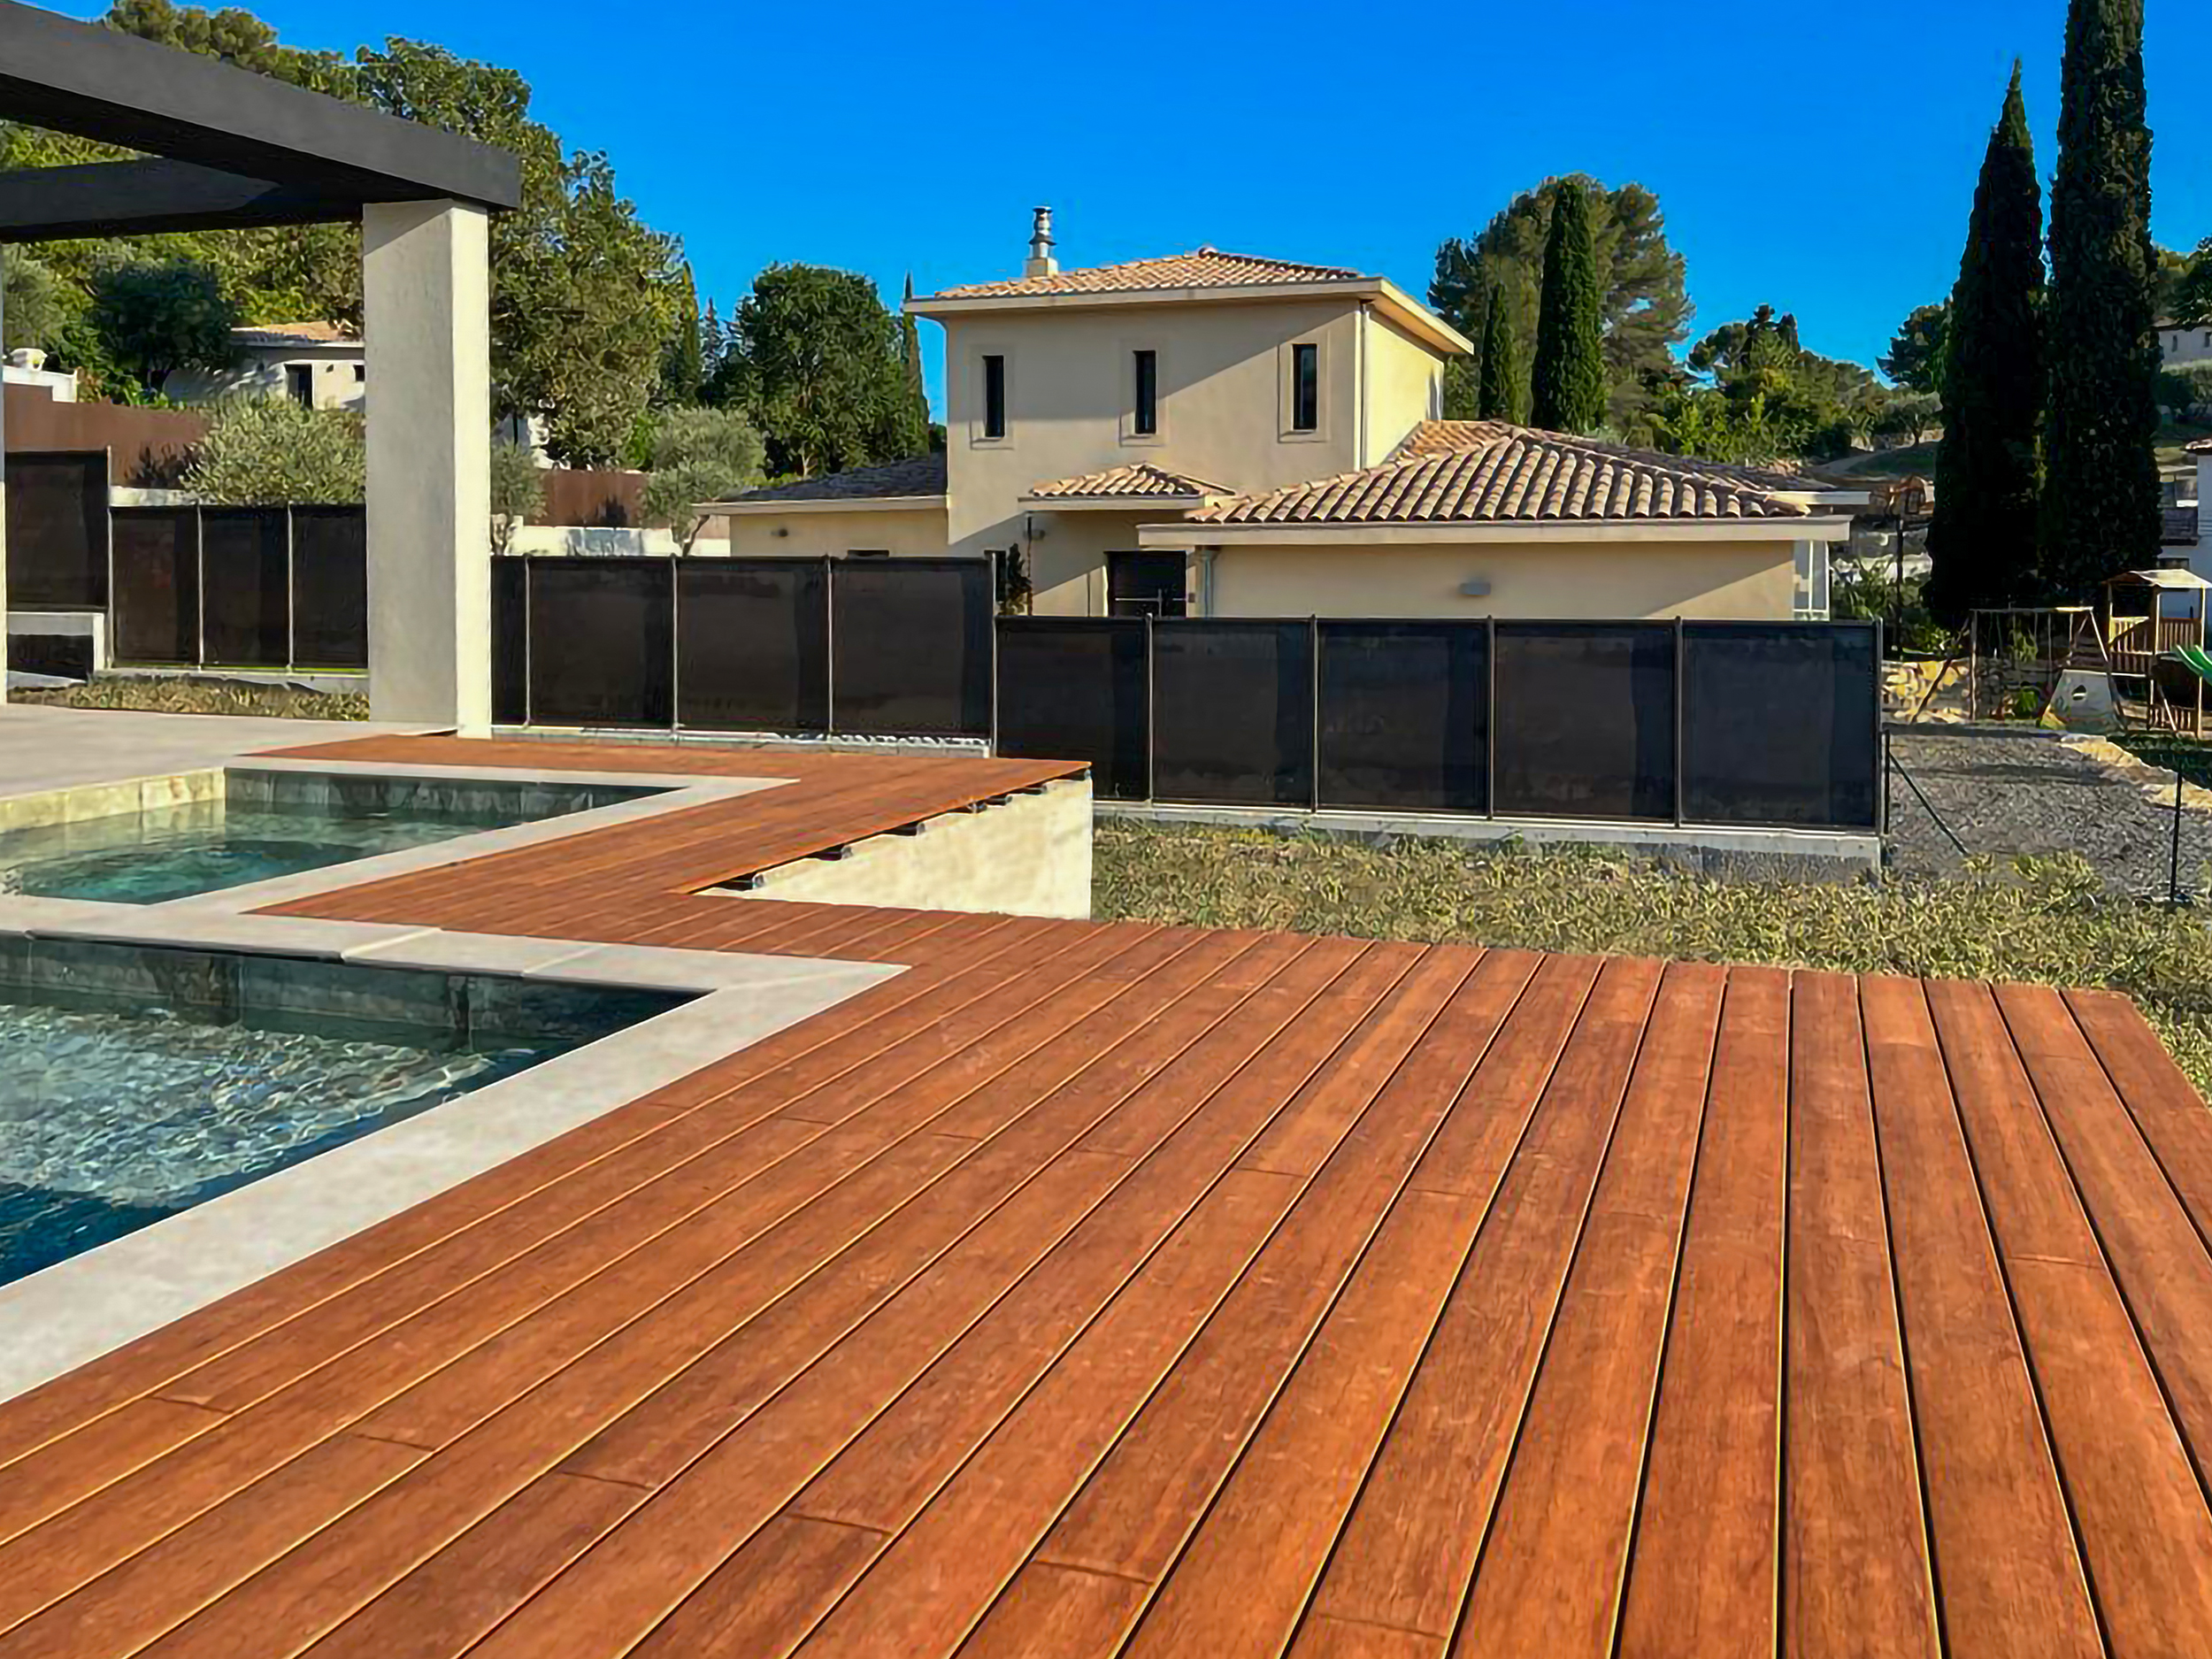 Curved bamboo decking